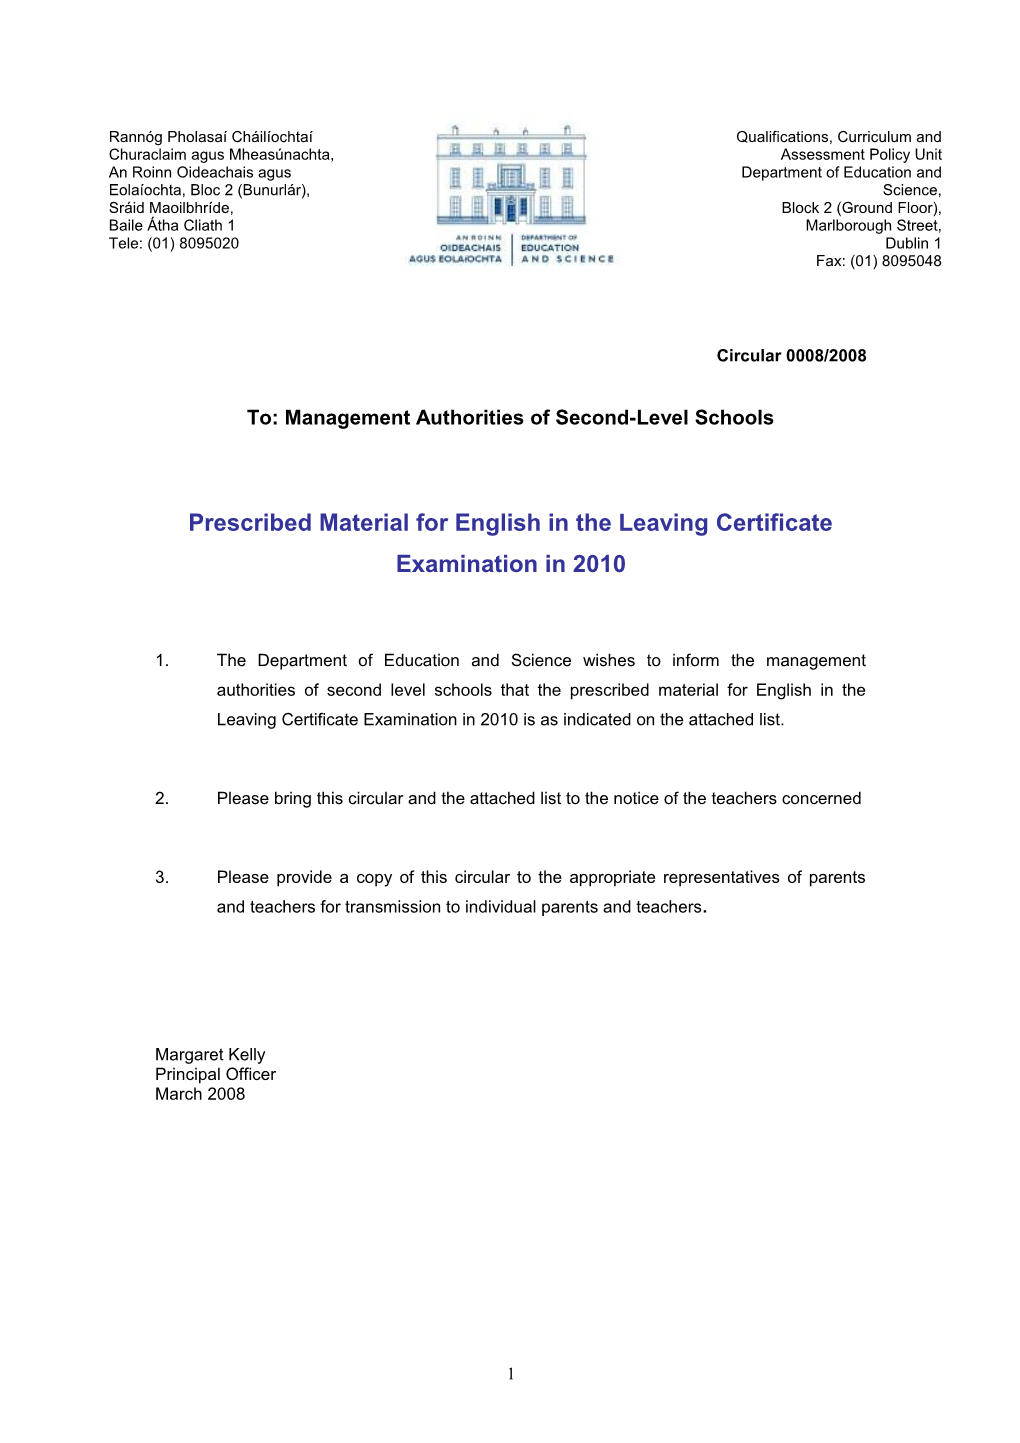 Circular 0008/2008 - Prescribed Material for English in the Leaving Certificate Examination